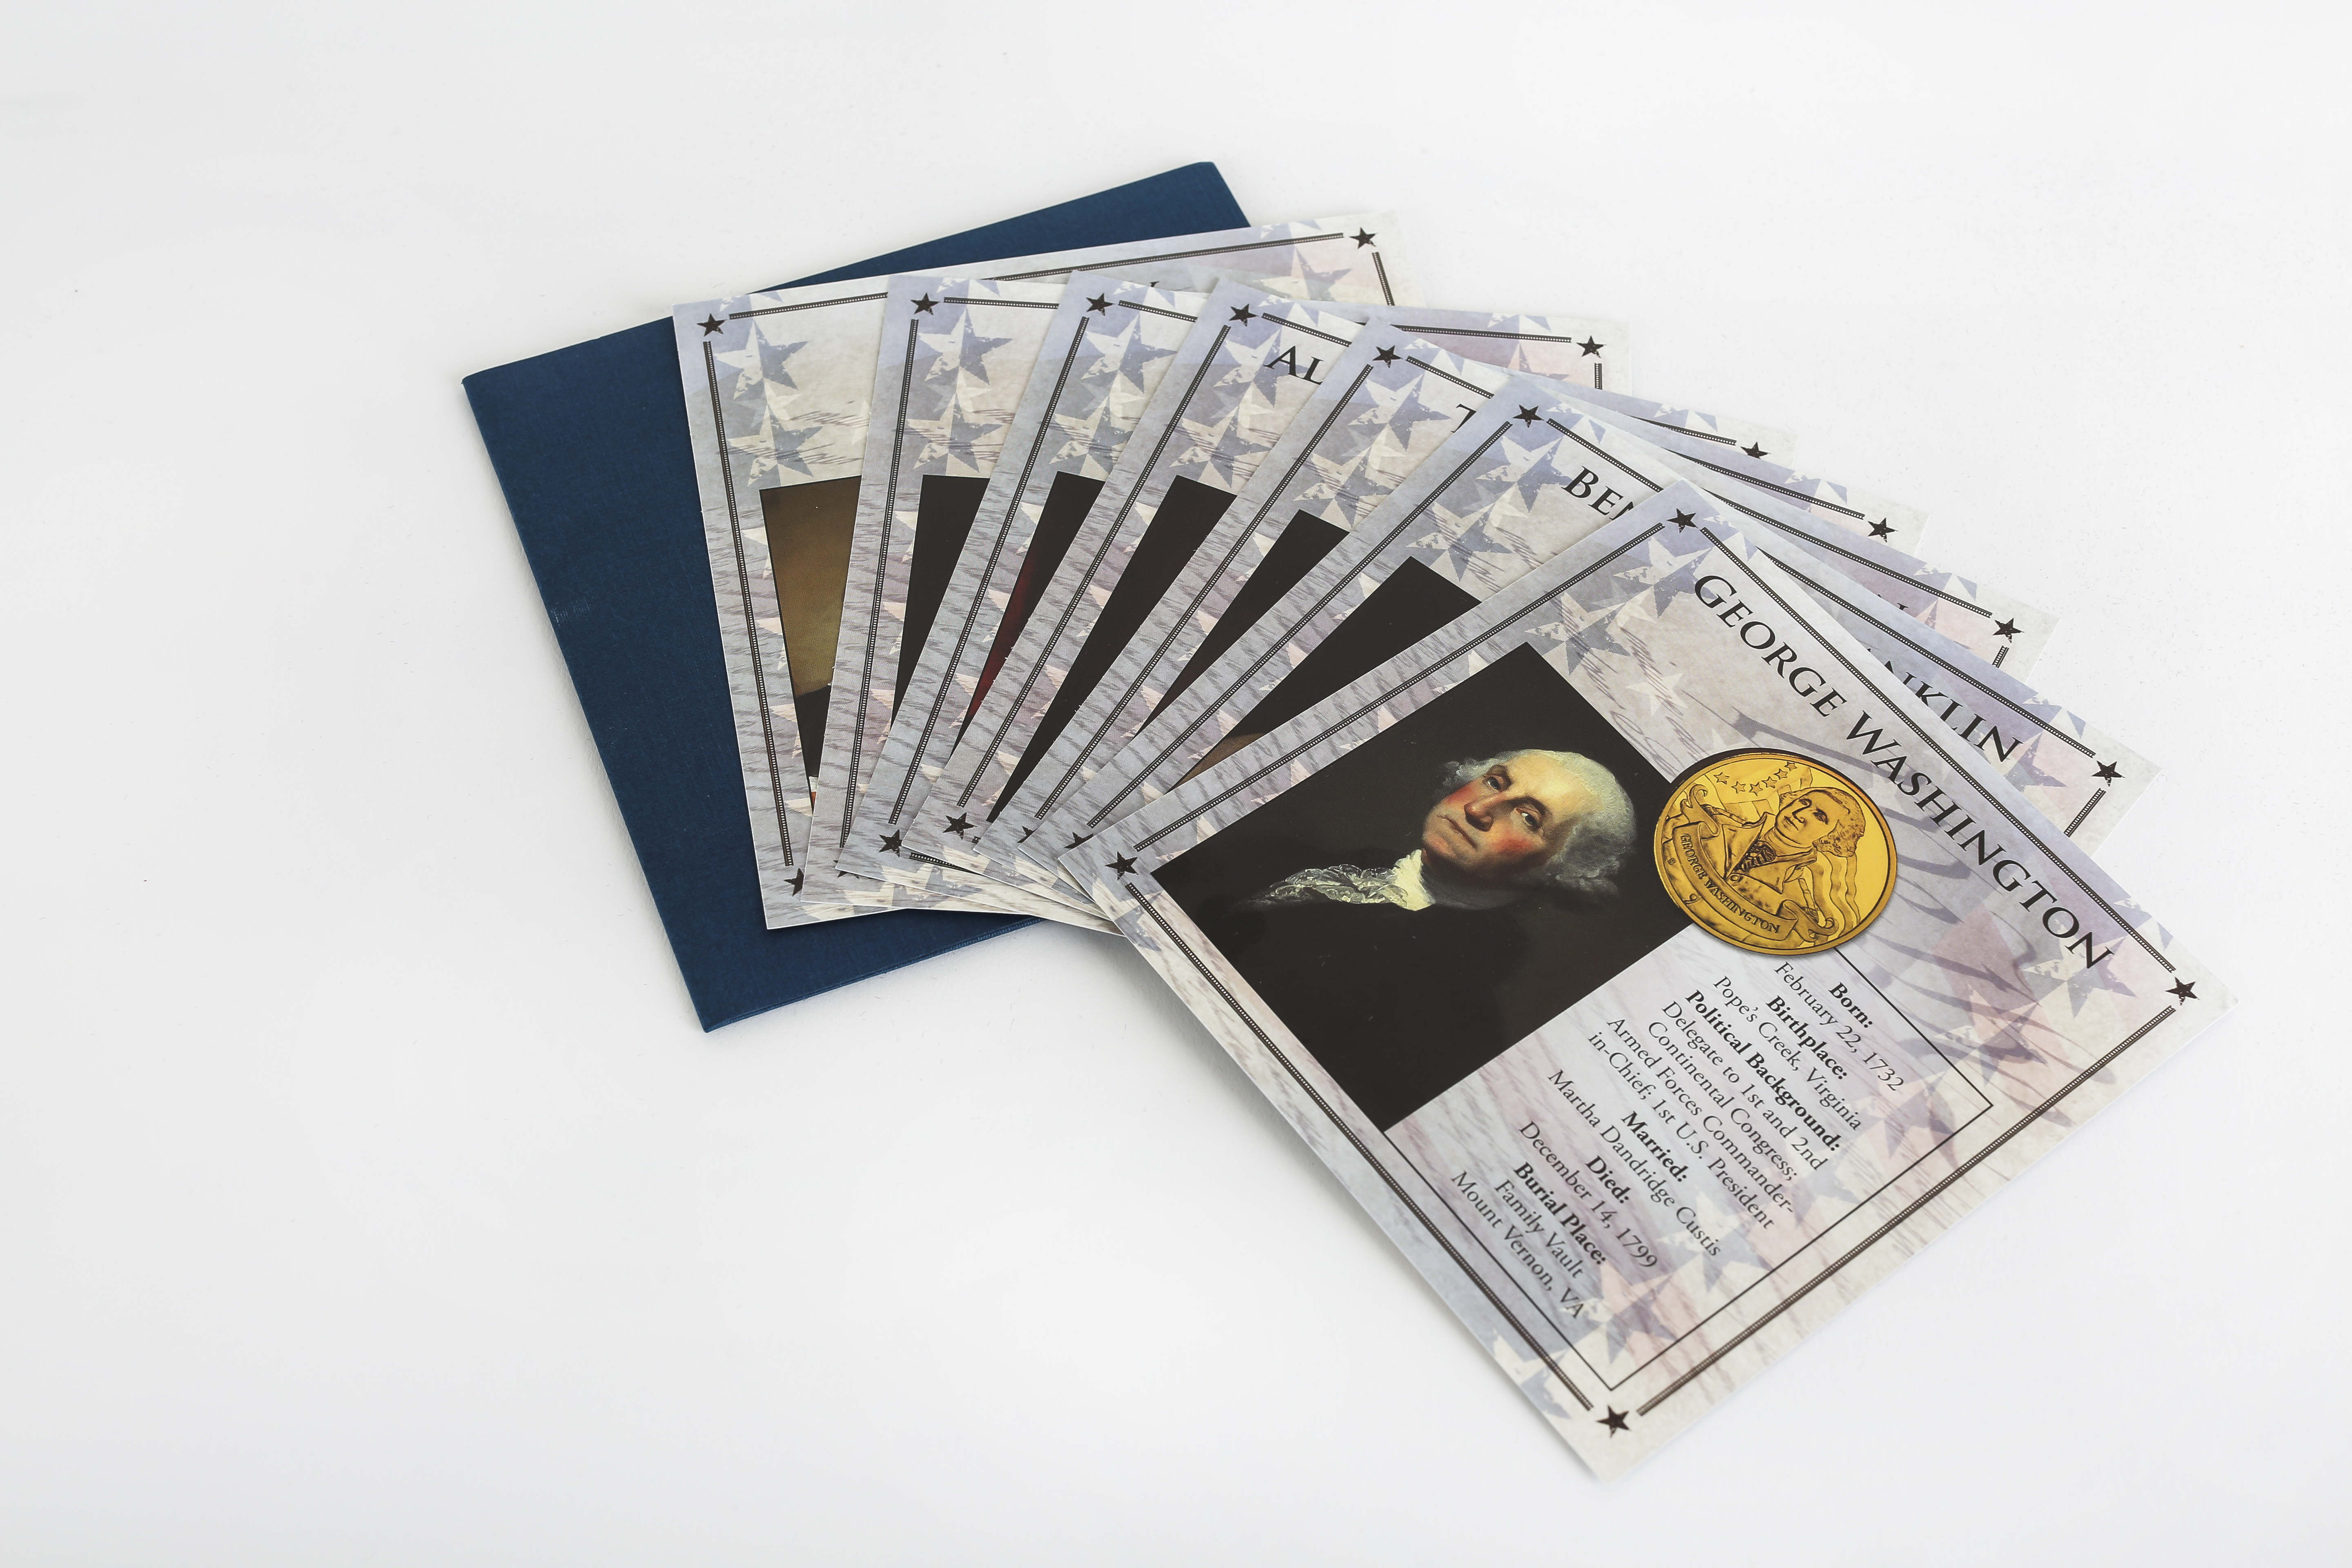 President cards with images of coins